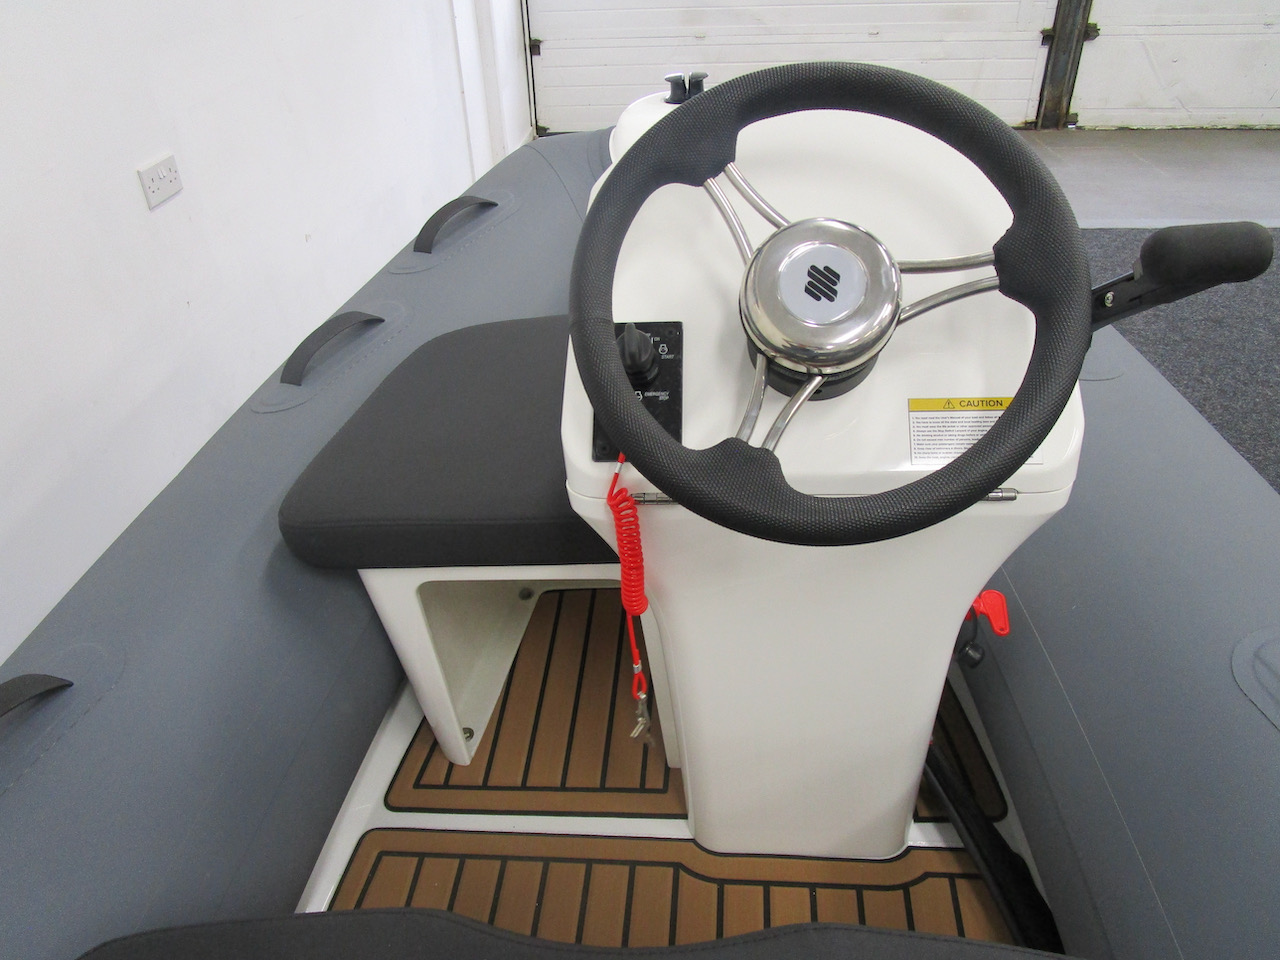 GRAND S330 RIB tender helm position and side seat